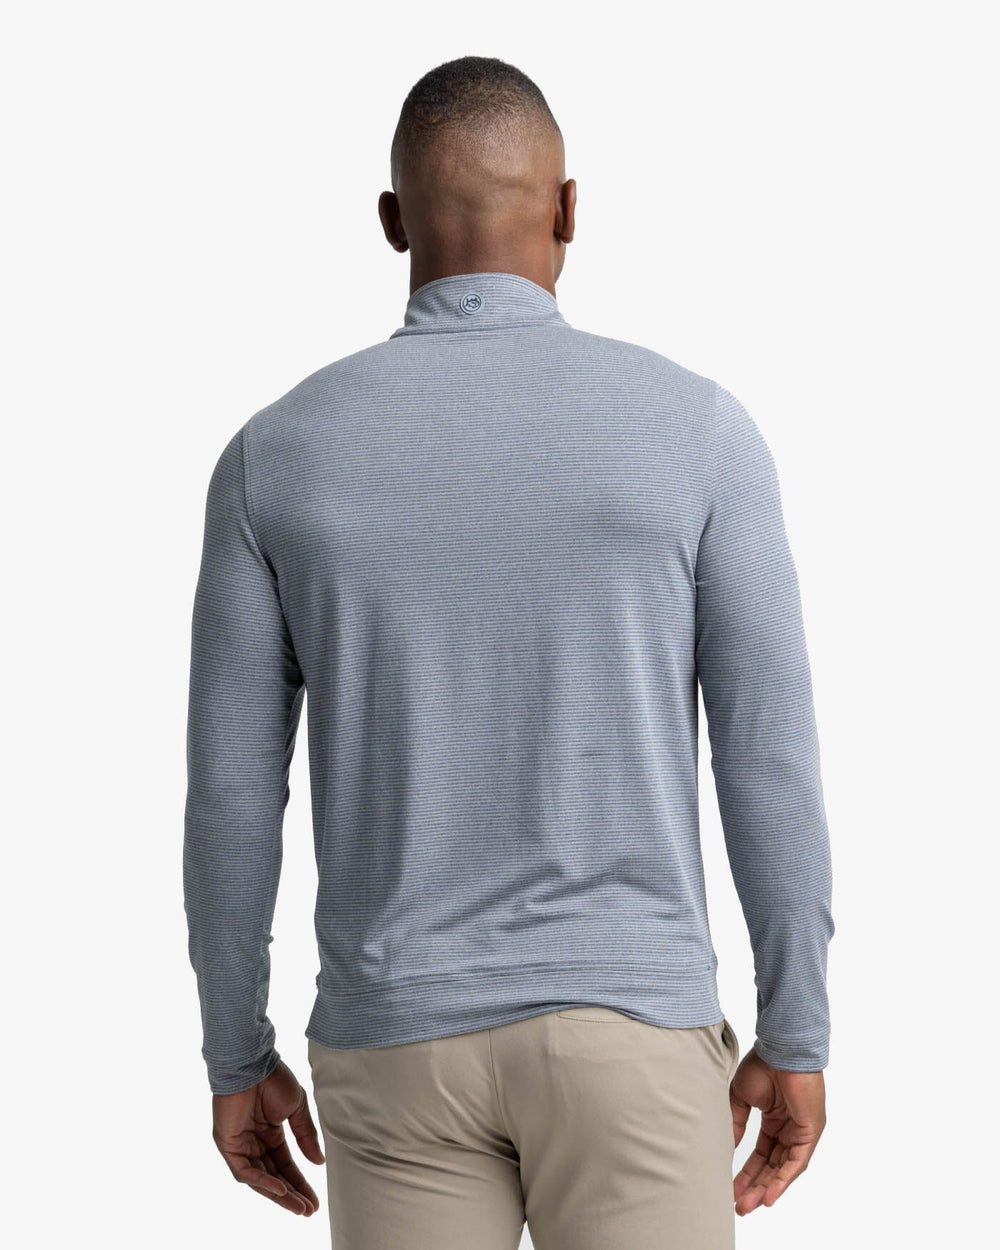 The back view of the Southern Tide Cruiser Heather Micro-Stripe Performance Quarter Zip Pullover by Southern Tide - Heather Shadow Grey